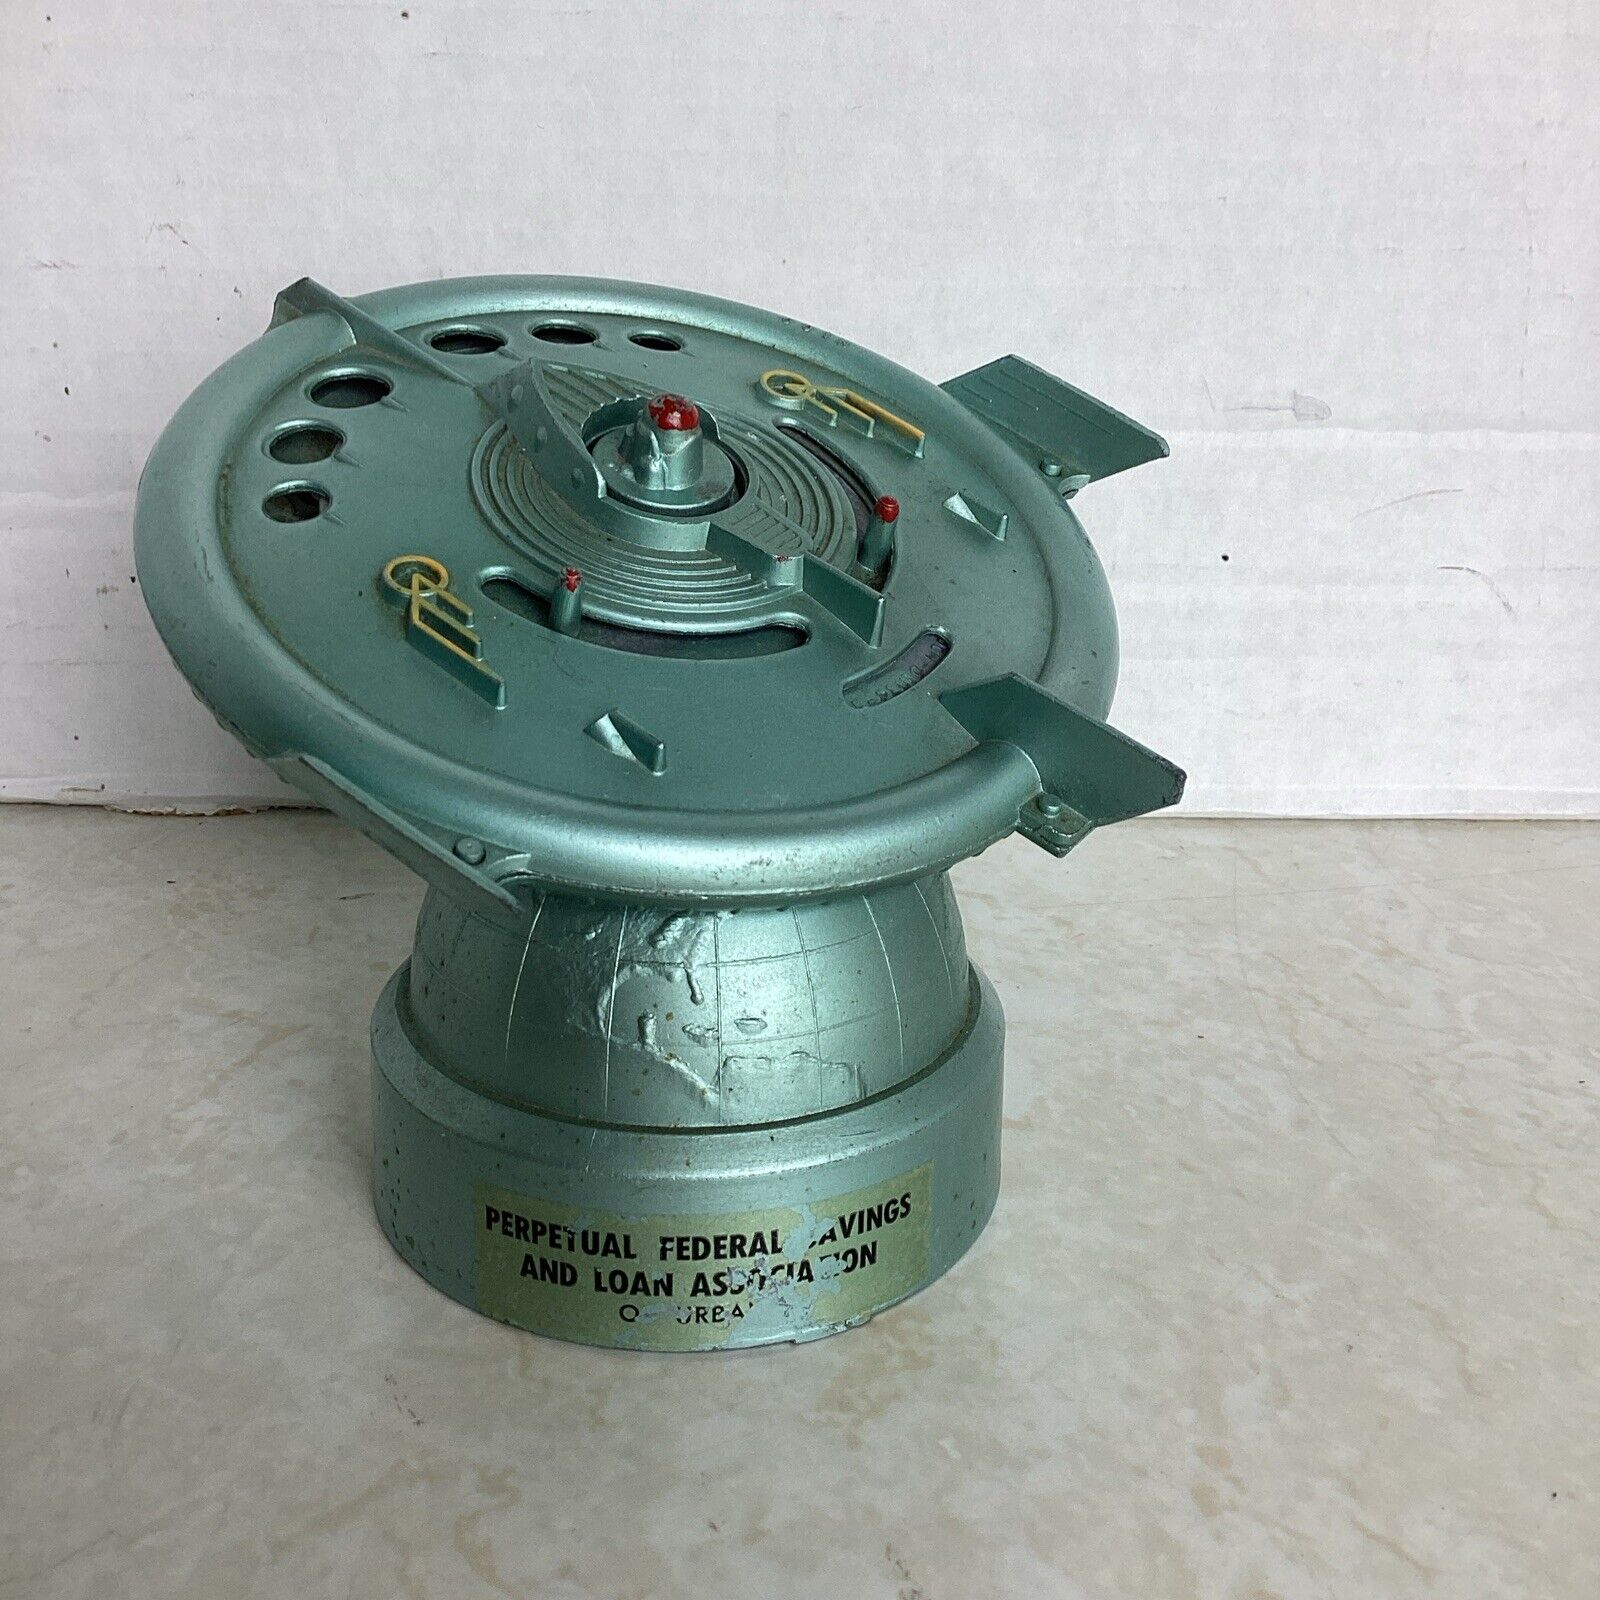 Duro Mold 101 Flying Saucer Mechanical Bank 1956 With Coins Inside